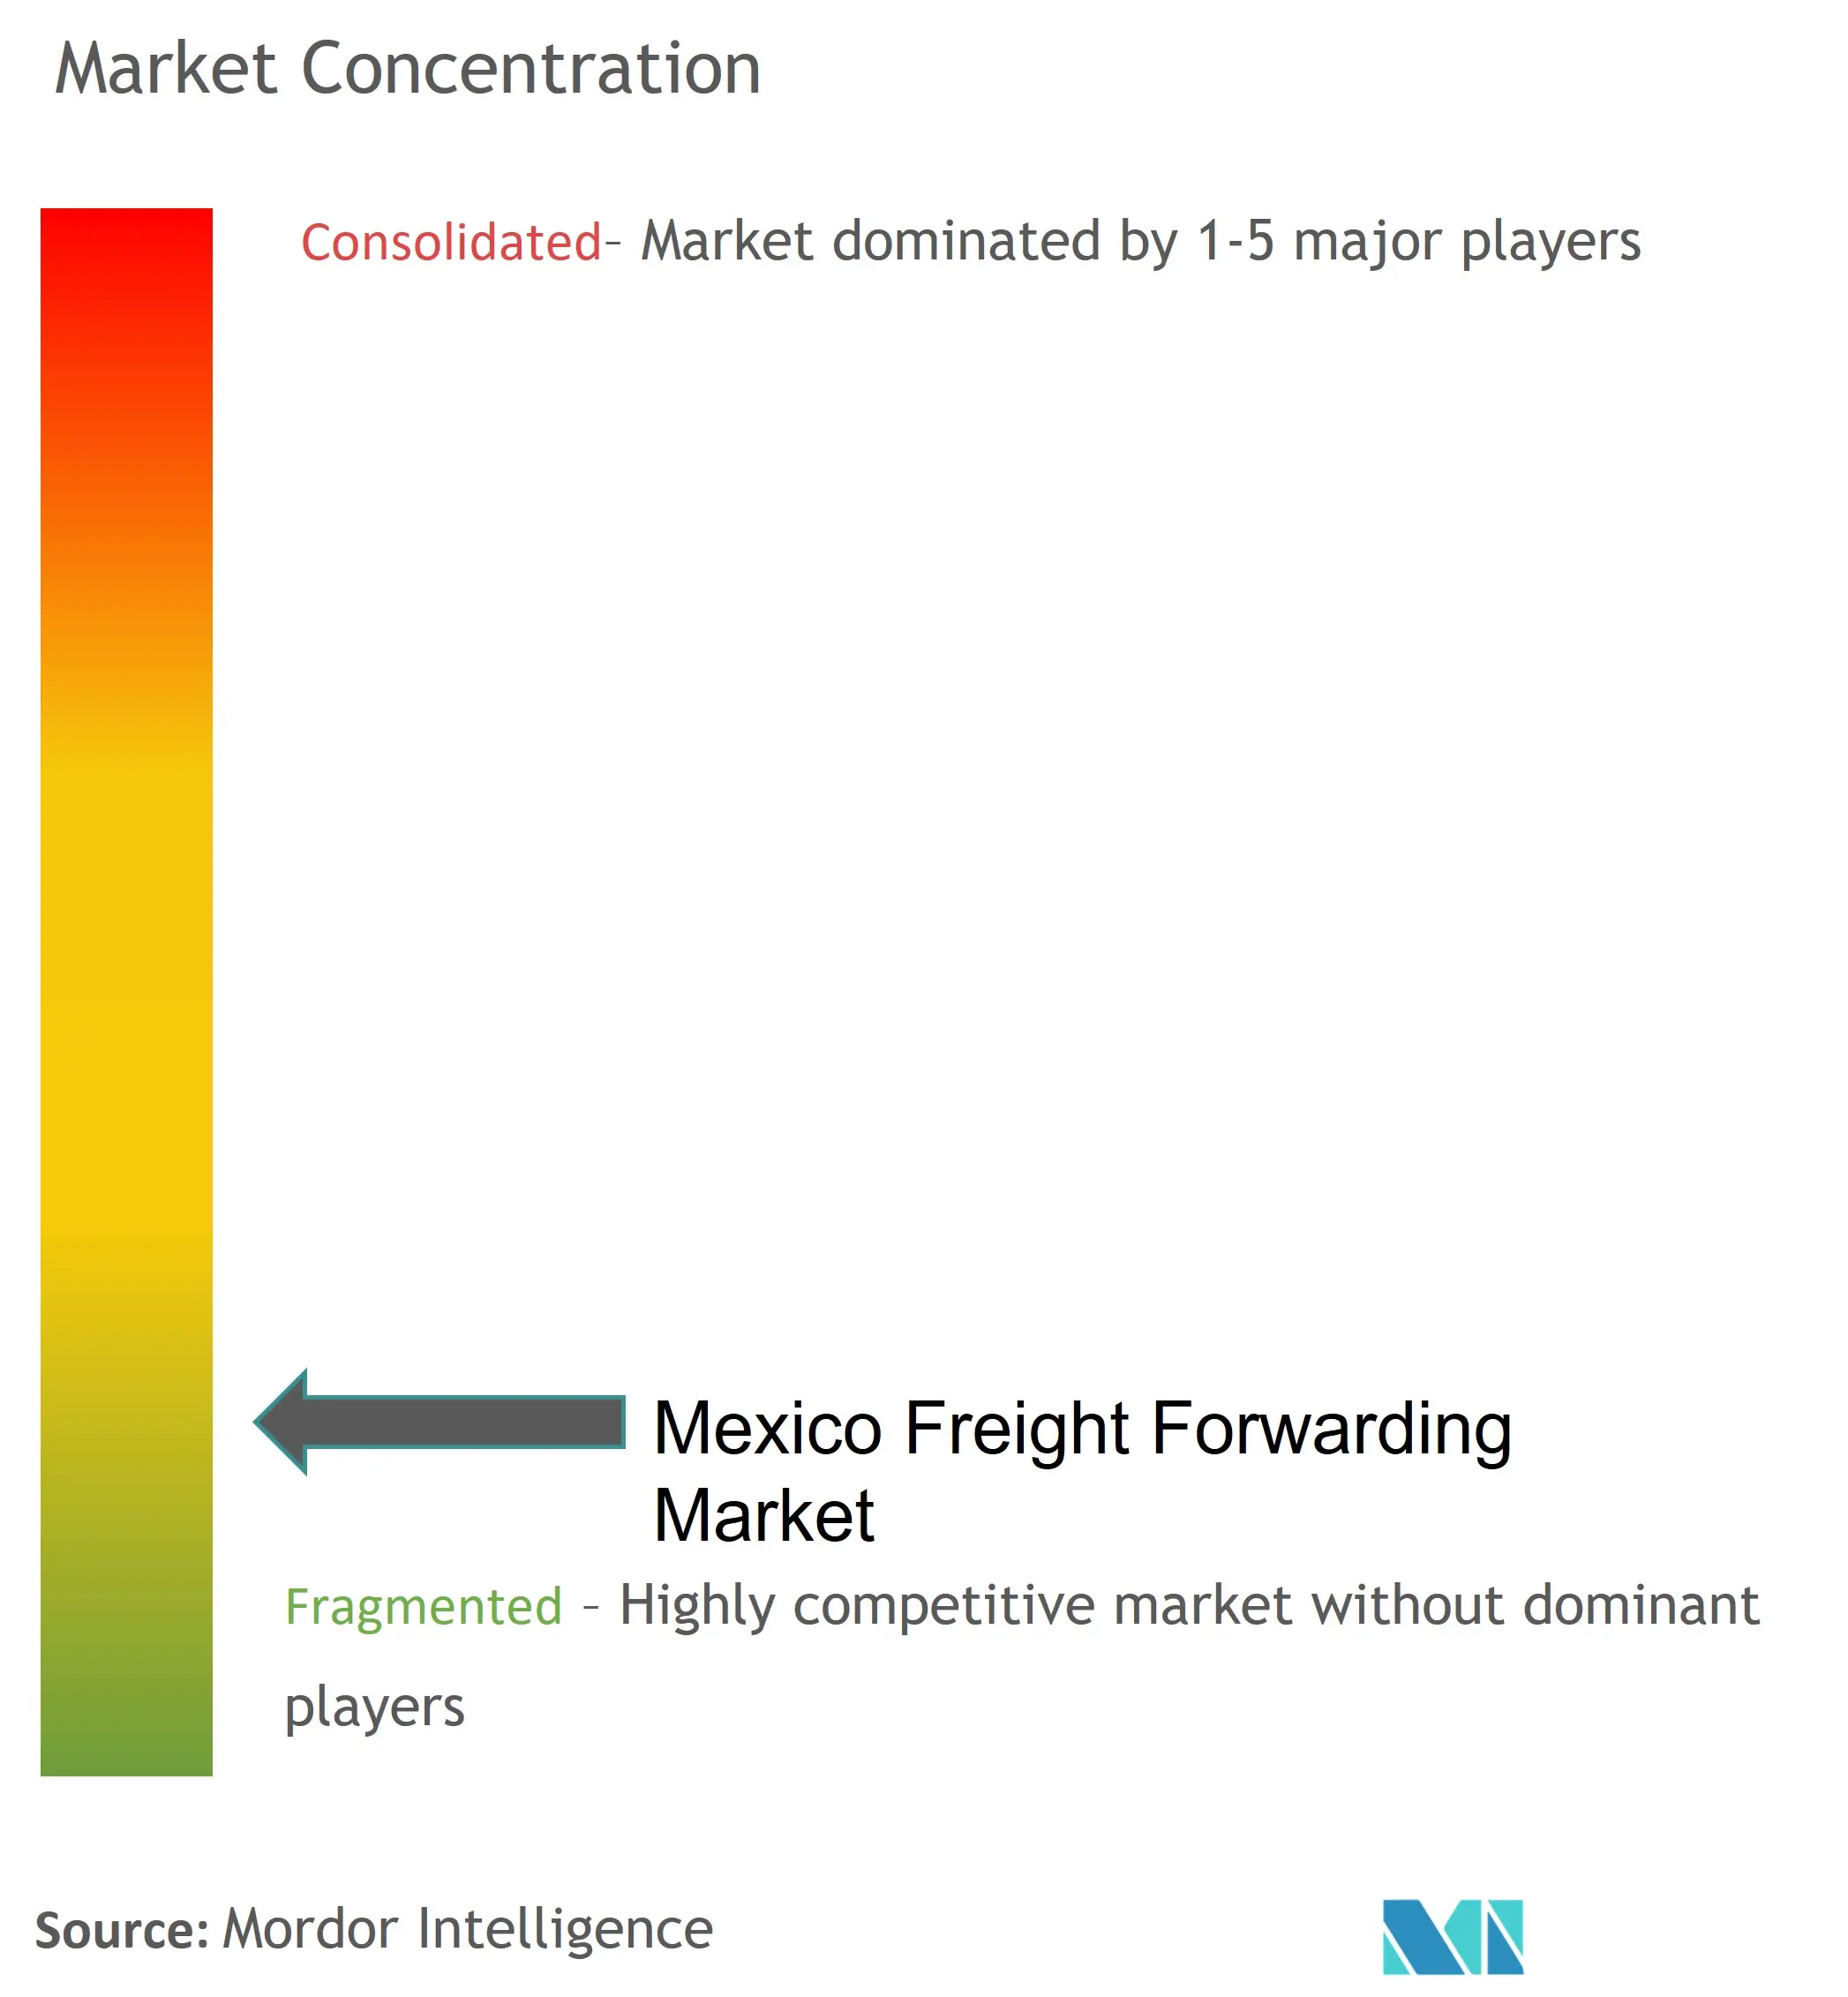 Mexico Freight Forwarding Market Concentration